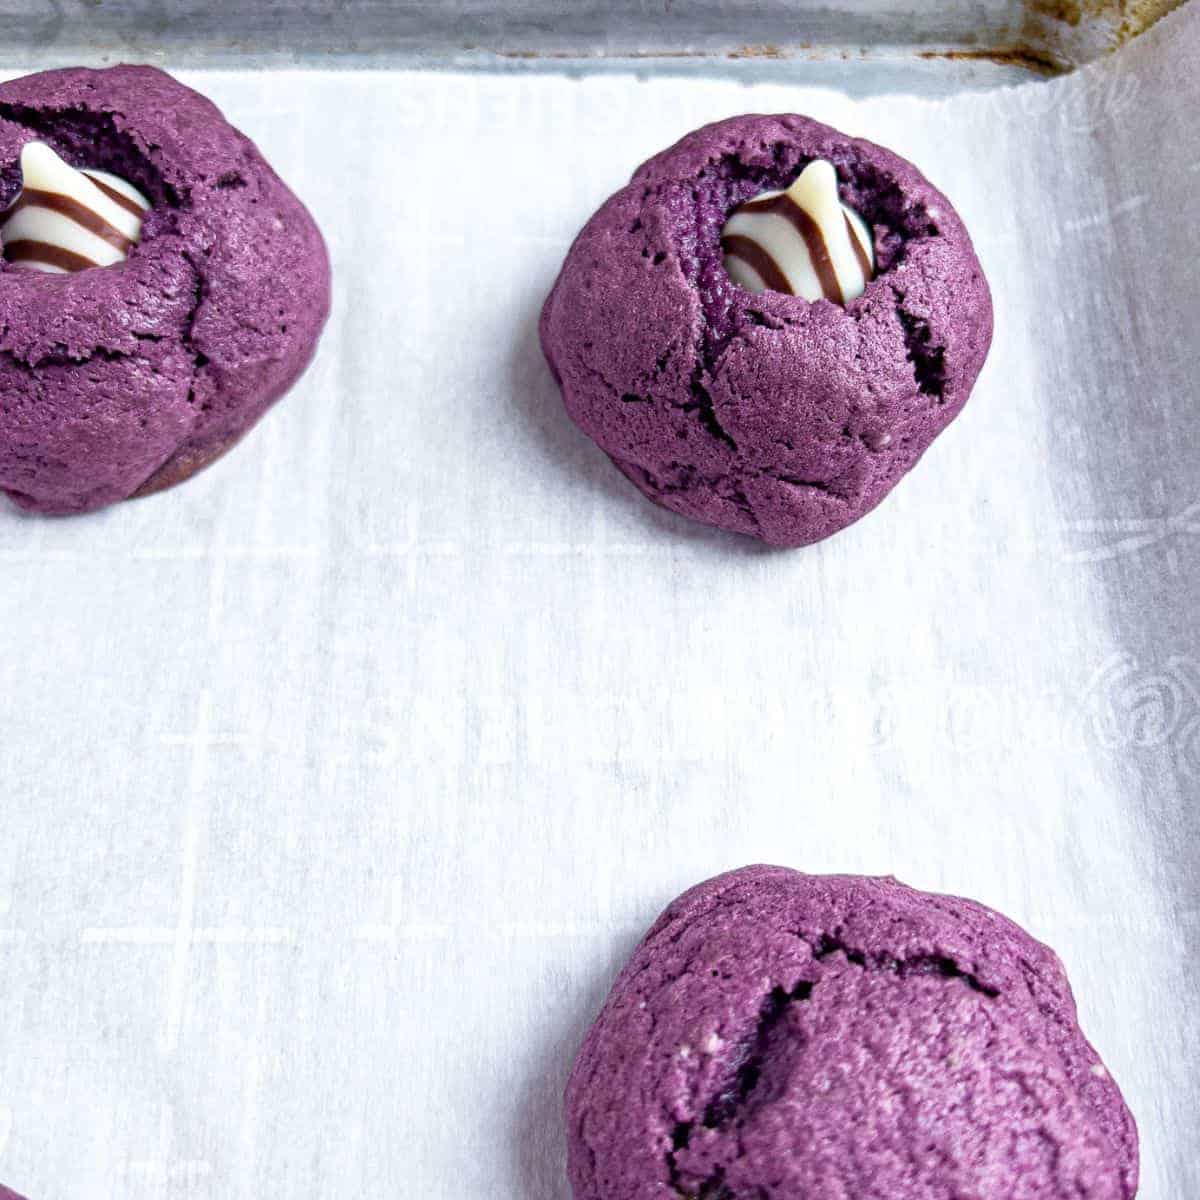 Finish baked ube cookies with milk chocolate on top.